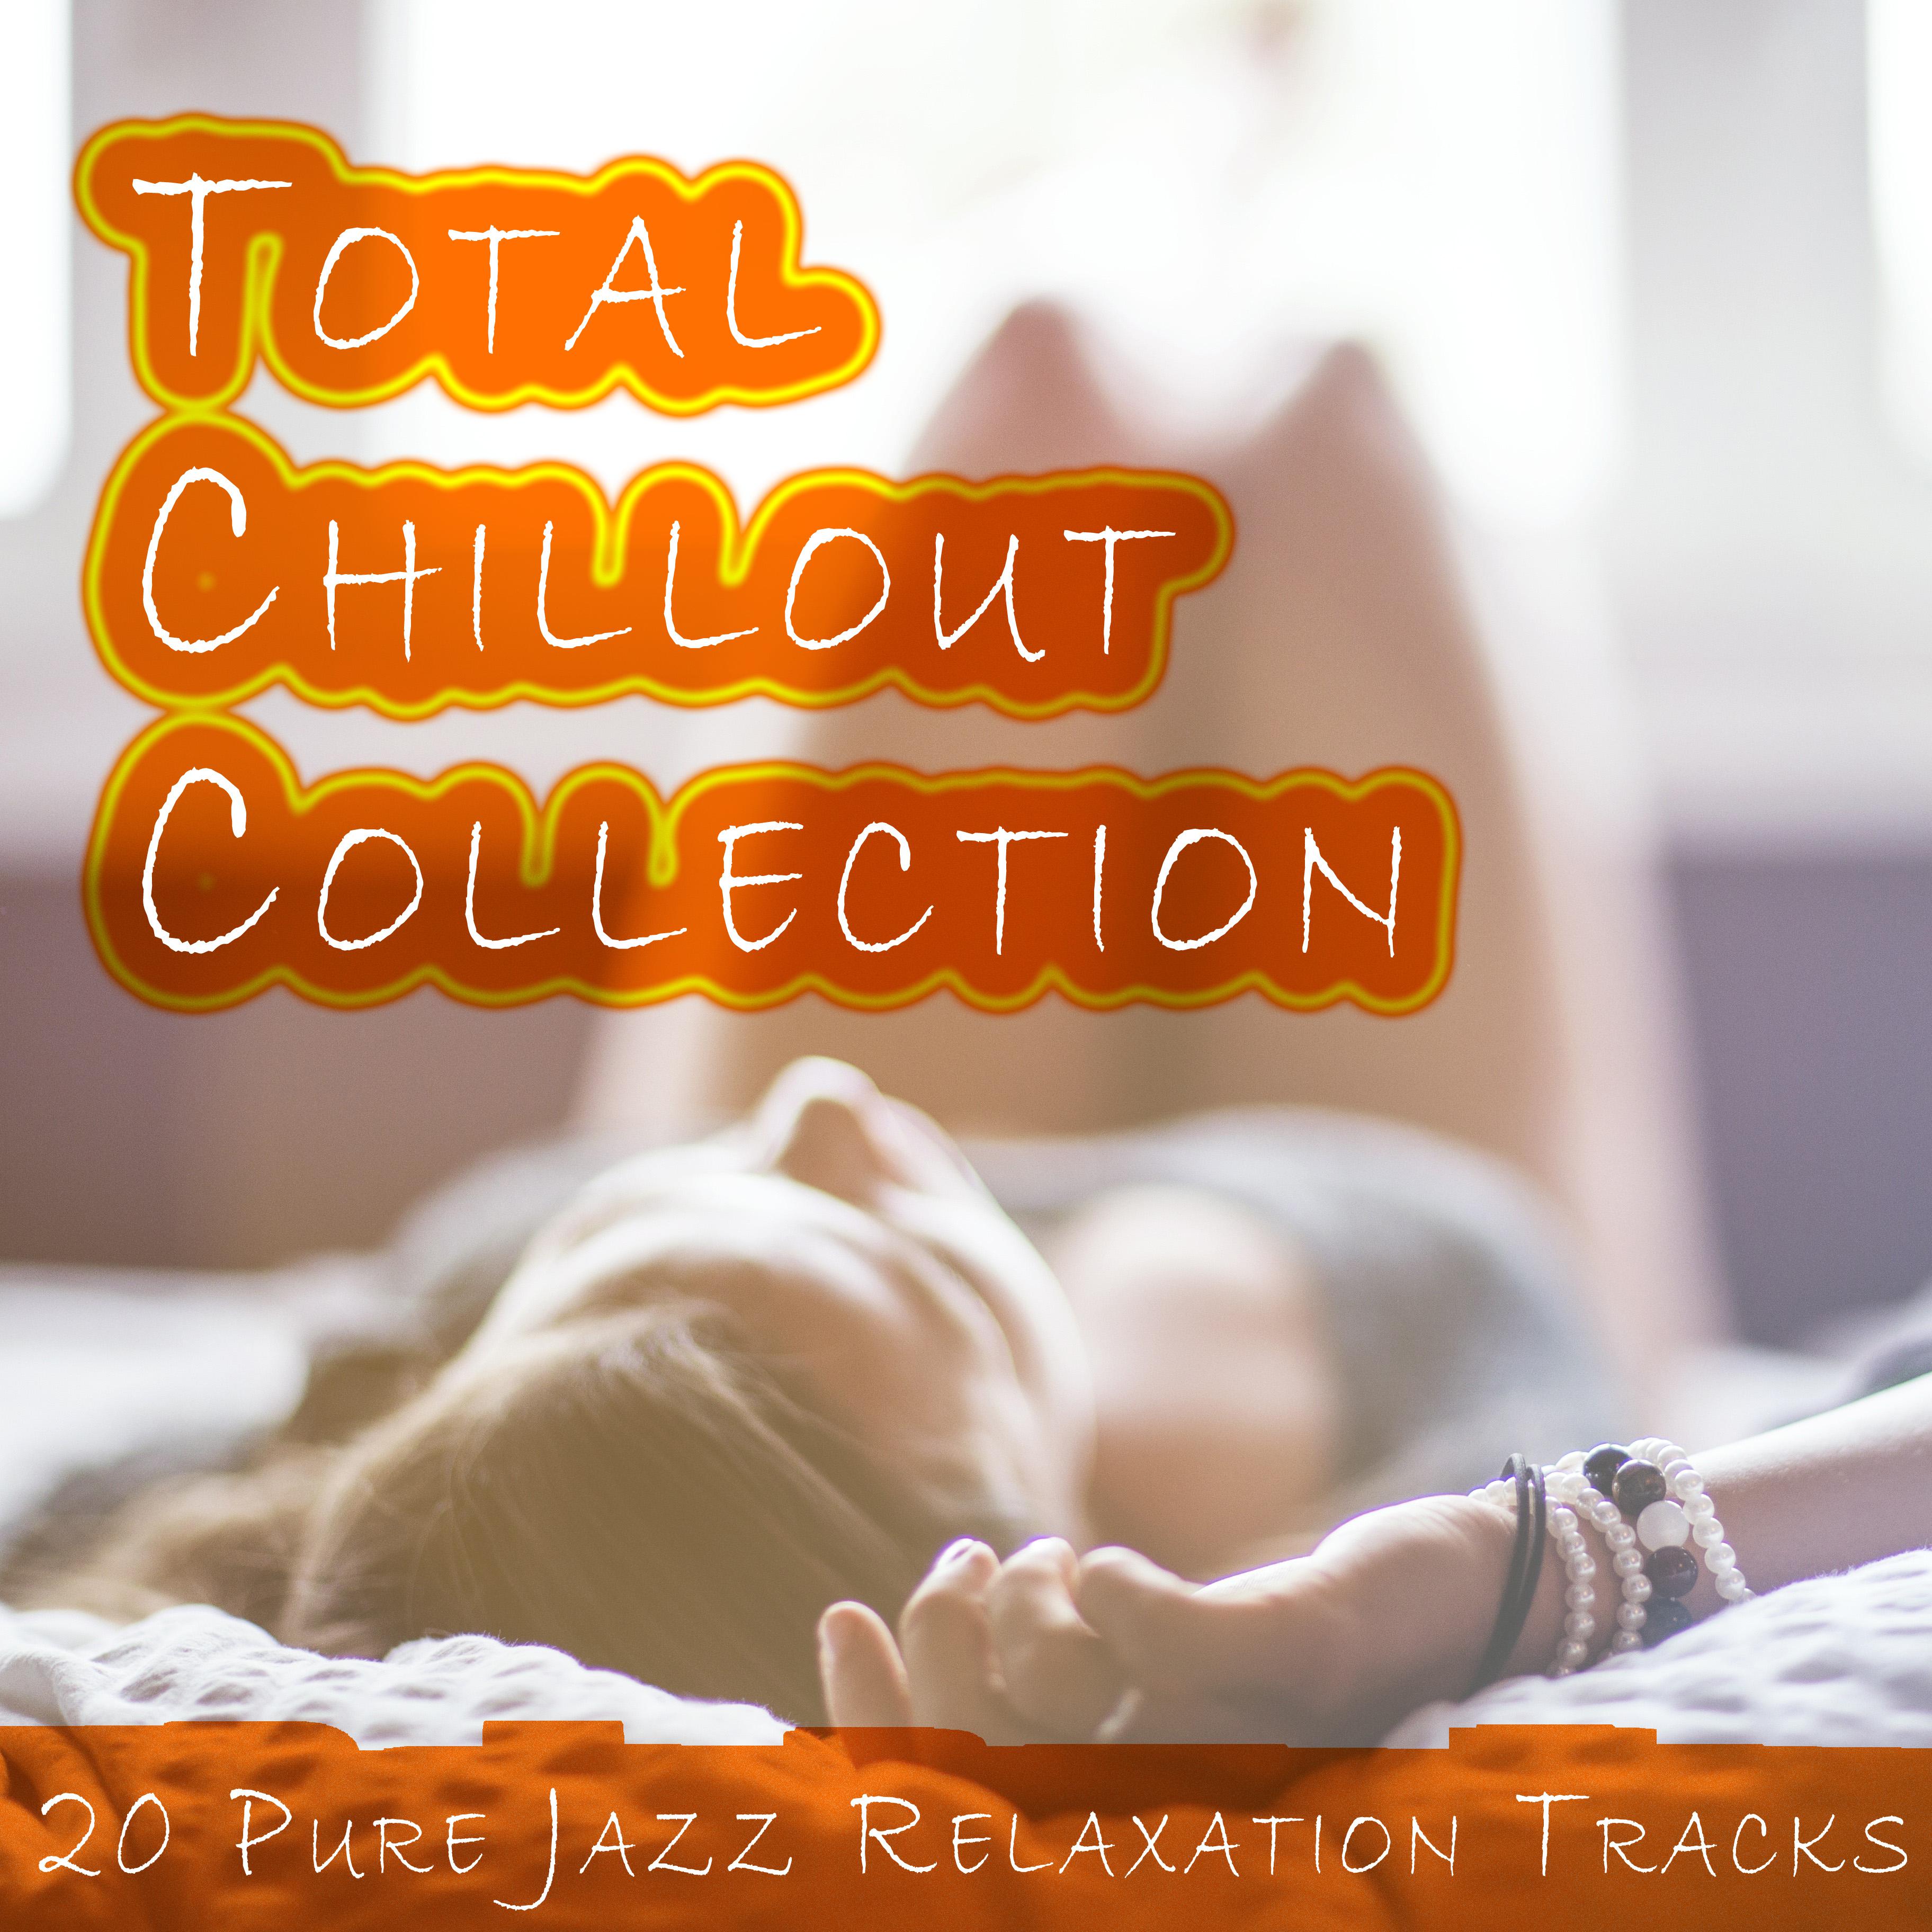 Total Chillout Collection - 20 Pure Ambient Relaxation Tracks for Ultimate Good Vibes, Stress Relief, Study & Exam Focus, Yoga, Meditation & Spa Sessions and a Good Mood for Days